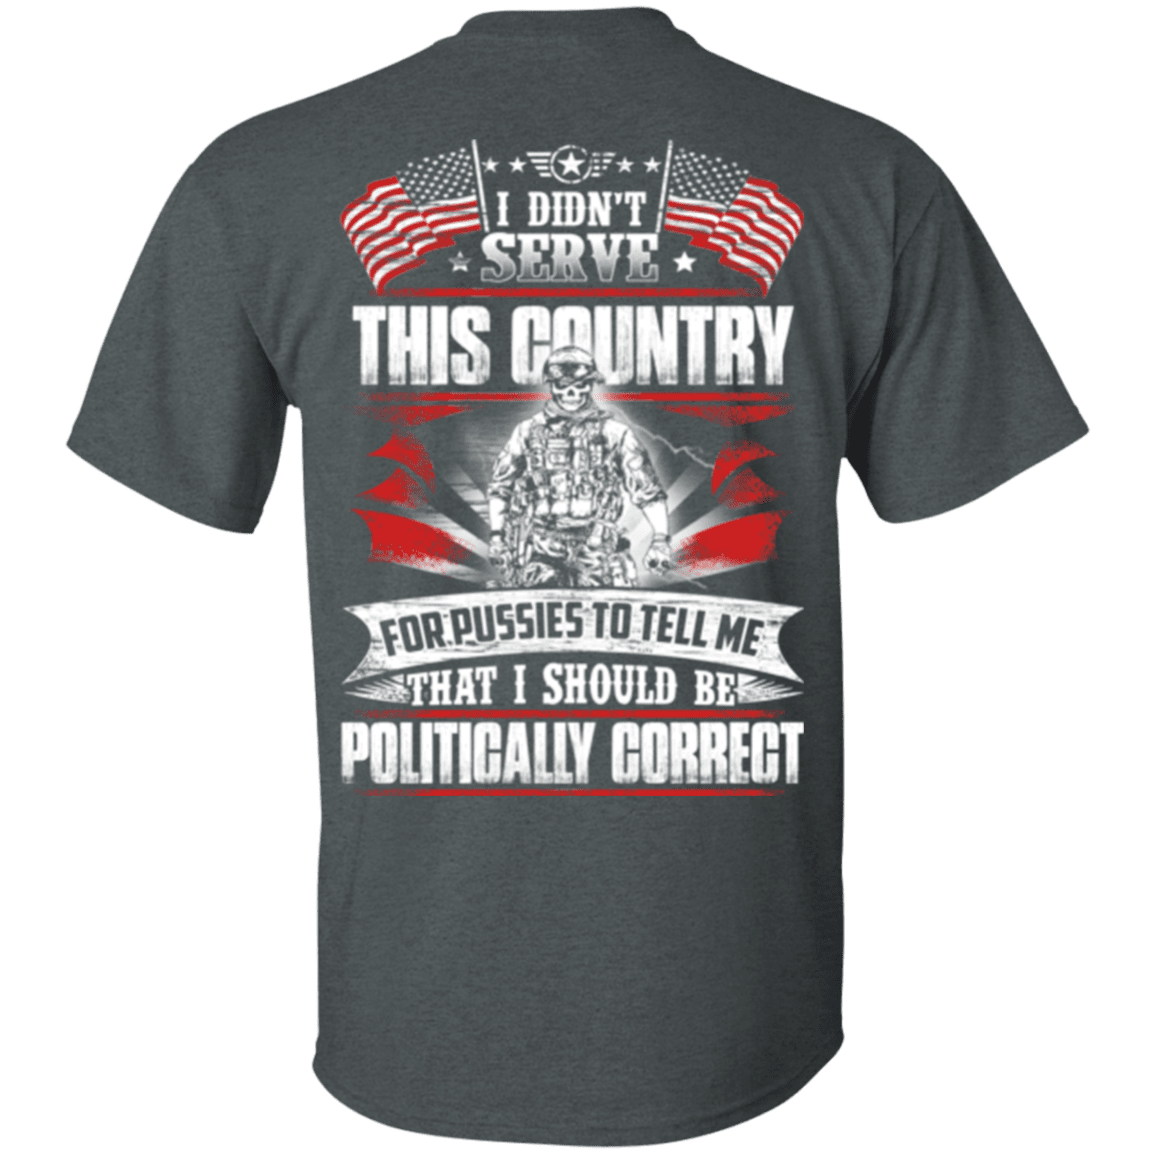 Military T-Shirt "I Didn't Serve This Country"-TShirt-General-Veterans Nation